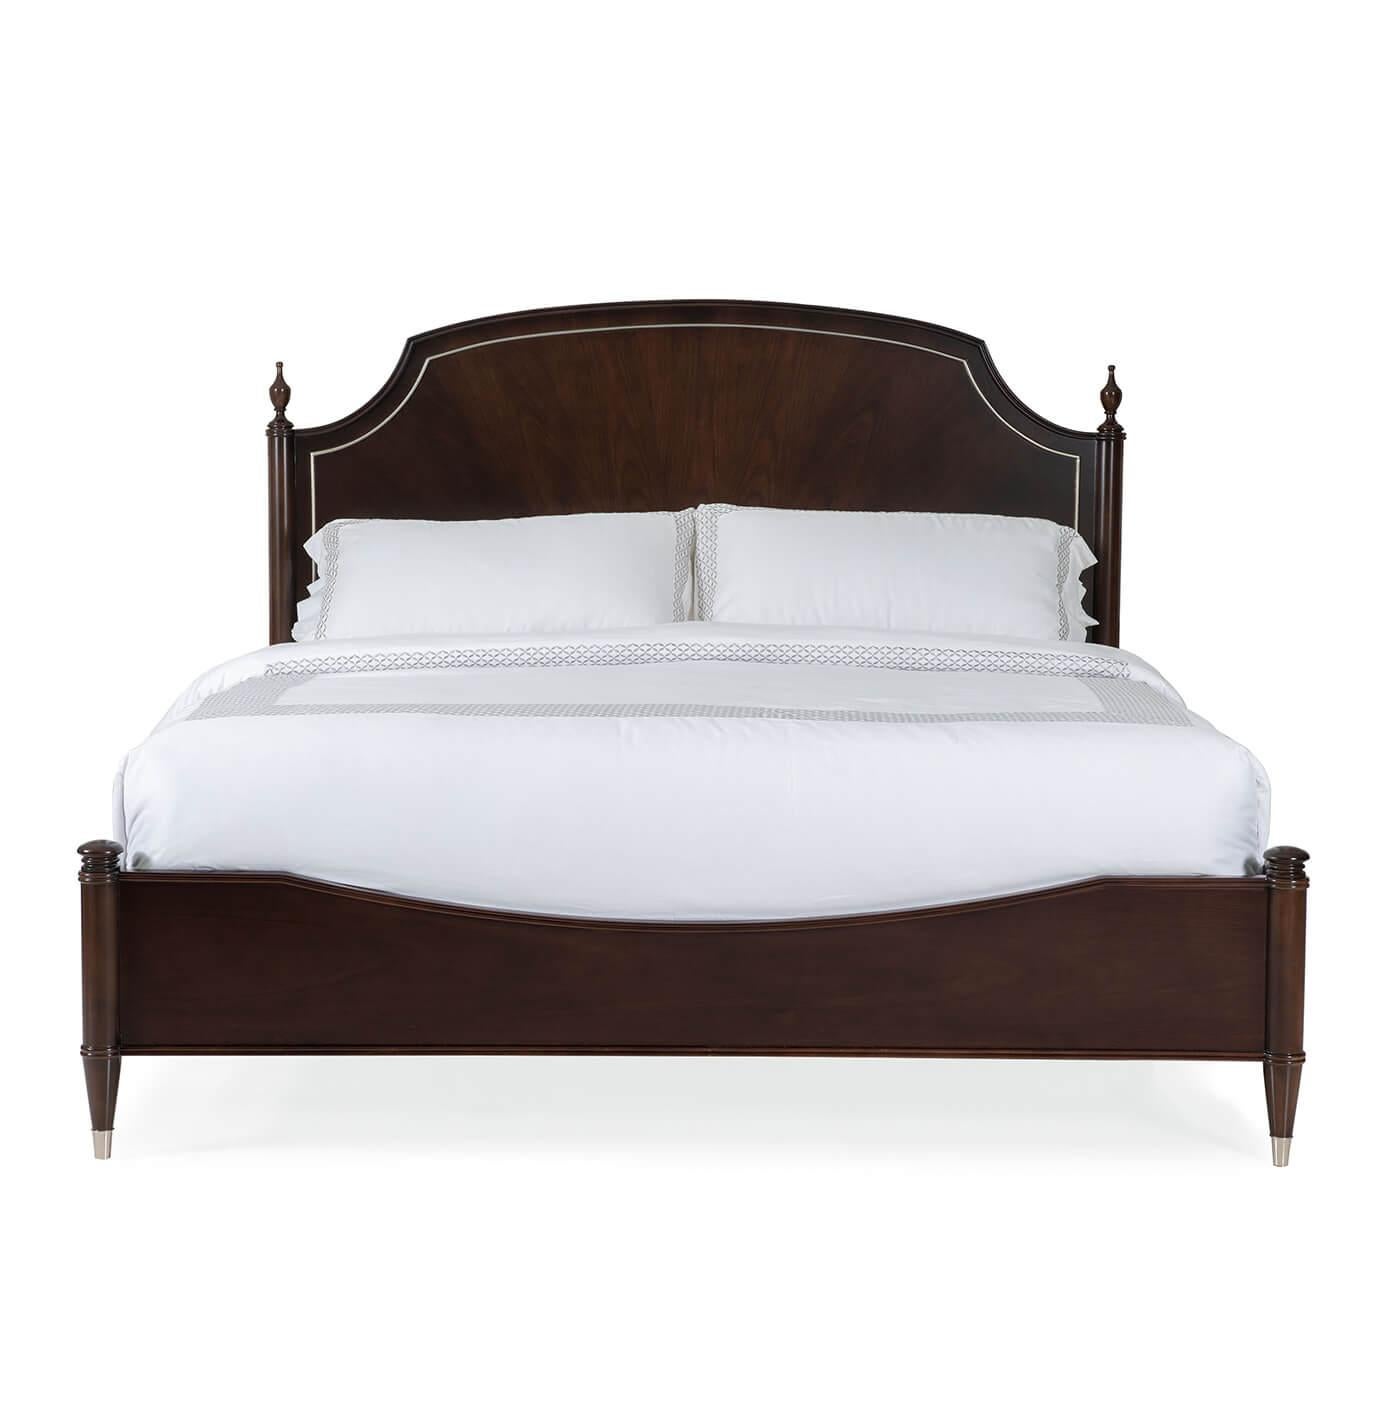 A European-style king bed with a heritage-style headboard. This bed has a modern classic design, inspired by an 18th-century Neo Classic antique, and has a beautiful Mocha Walnut finish. Cathedral walnut veneers create a magnificent radial pattern